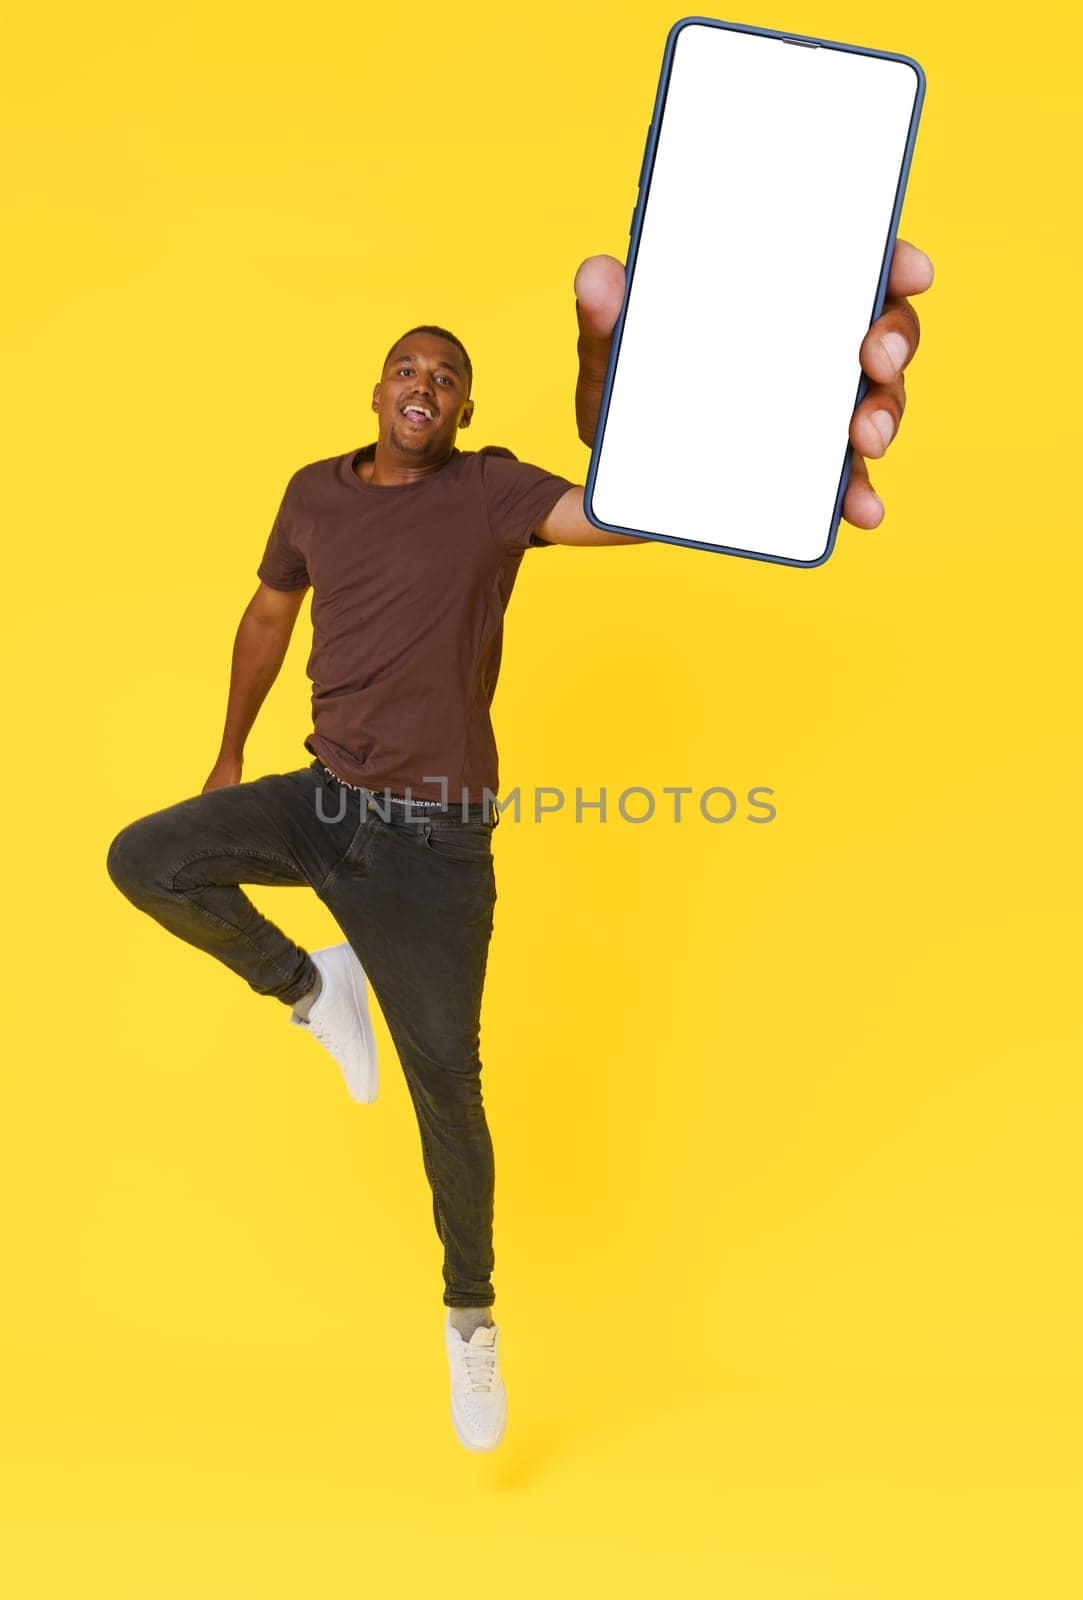 Energetic African American student is captured jumping with mobile phone featuring empty white screen in hand, on yellow background. This image is perfect for product placement or advertising concepts. by LipikStockMedia